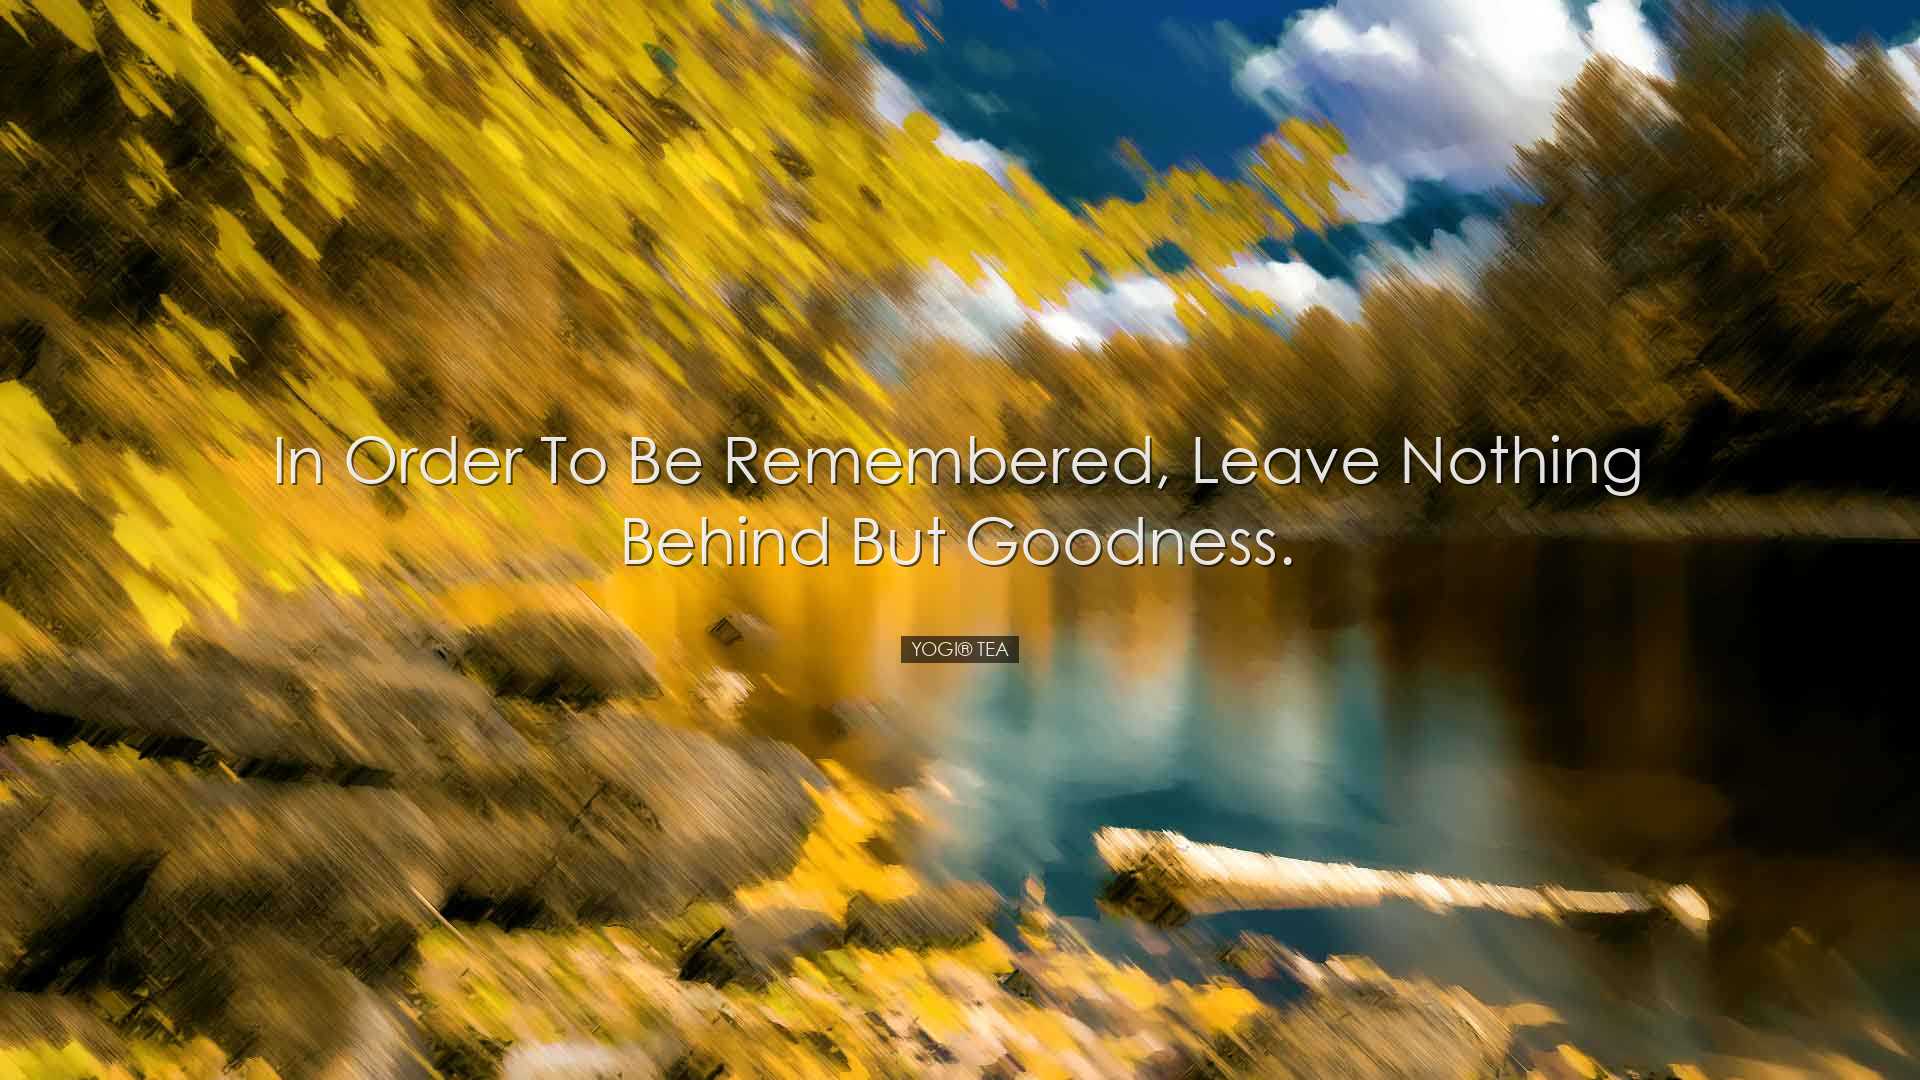 In order to be remembered, leave nothing behind but goodness. - Yo